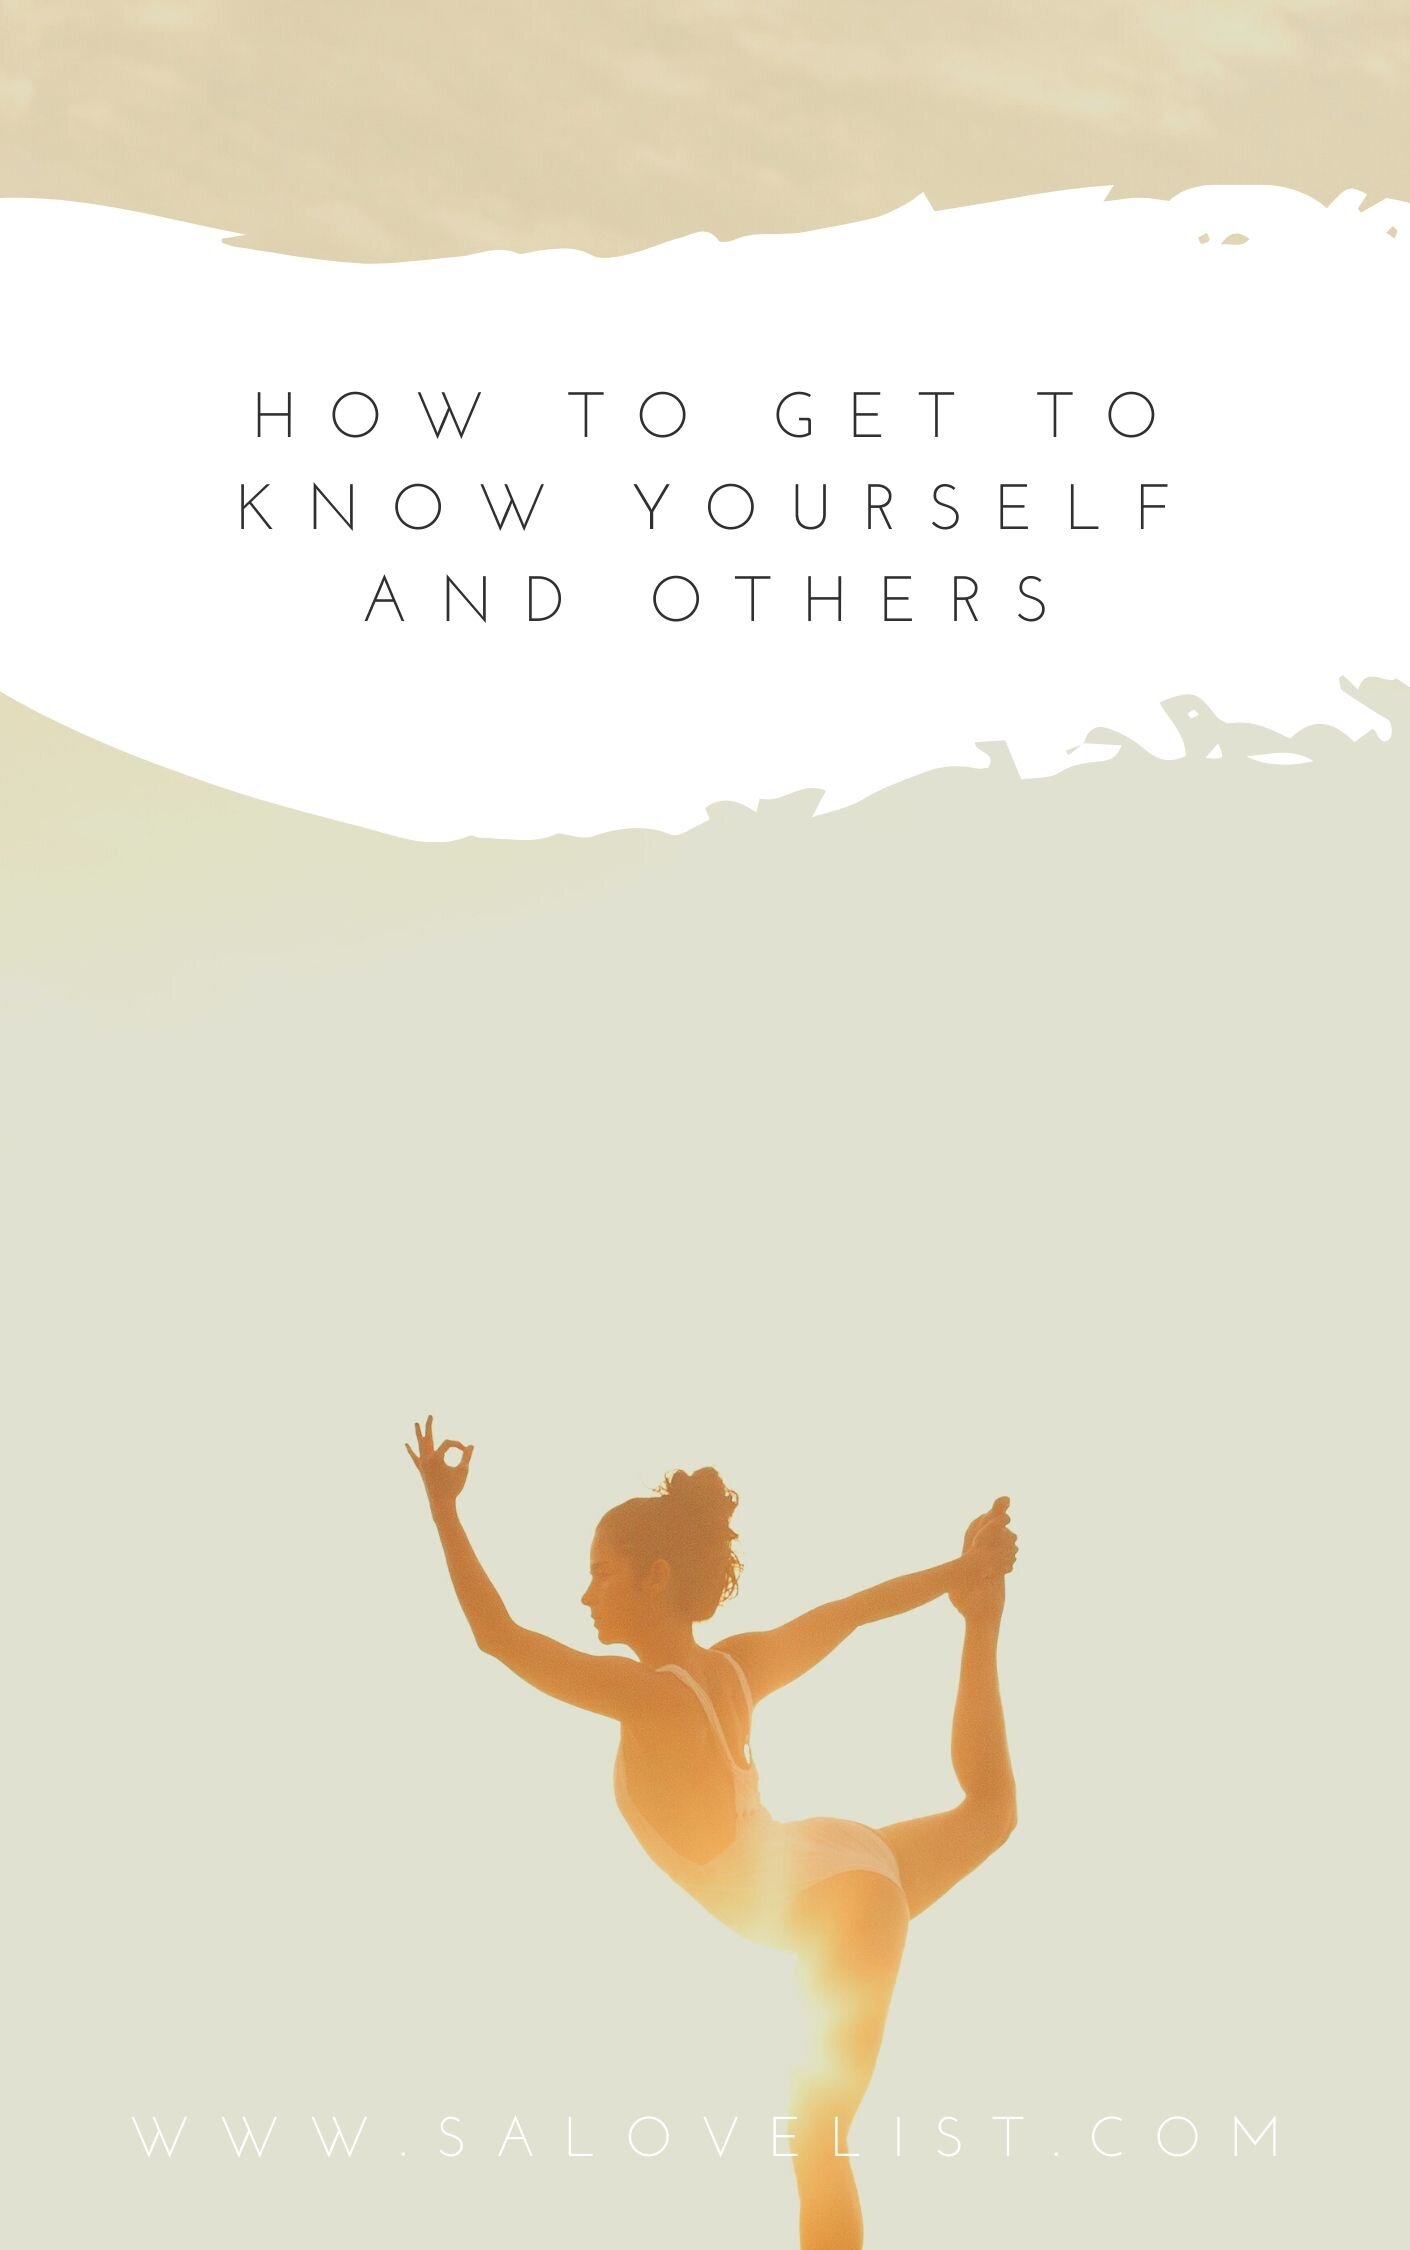 How to Get to Know Yourself and Others